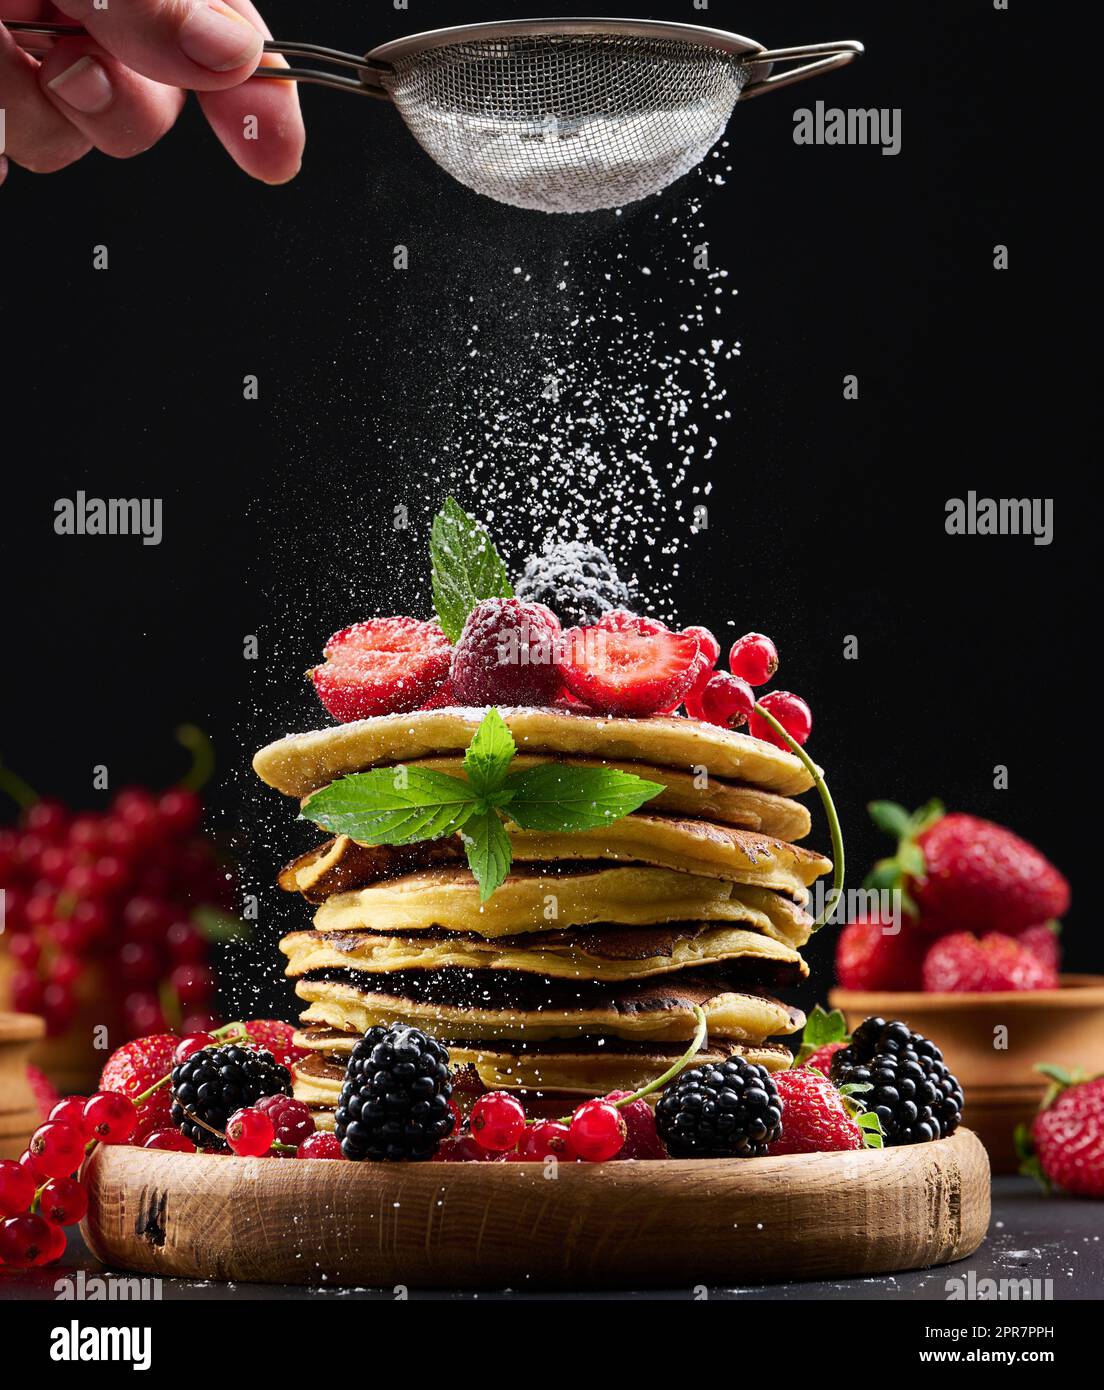 A stack of pancakes with fresh fruit sprinkled with powdered sugar on a black background Stock Photo